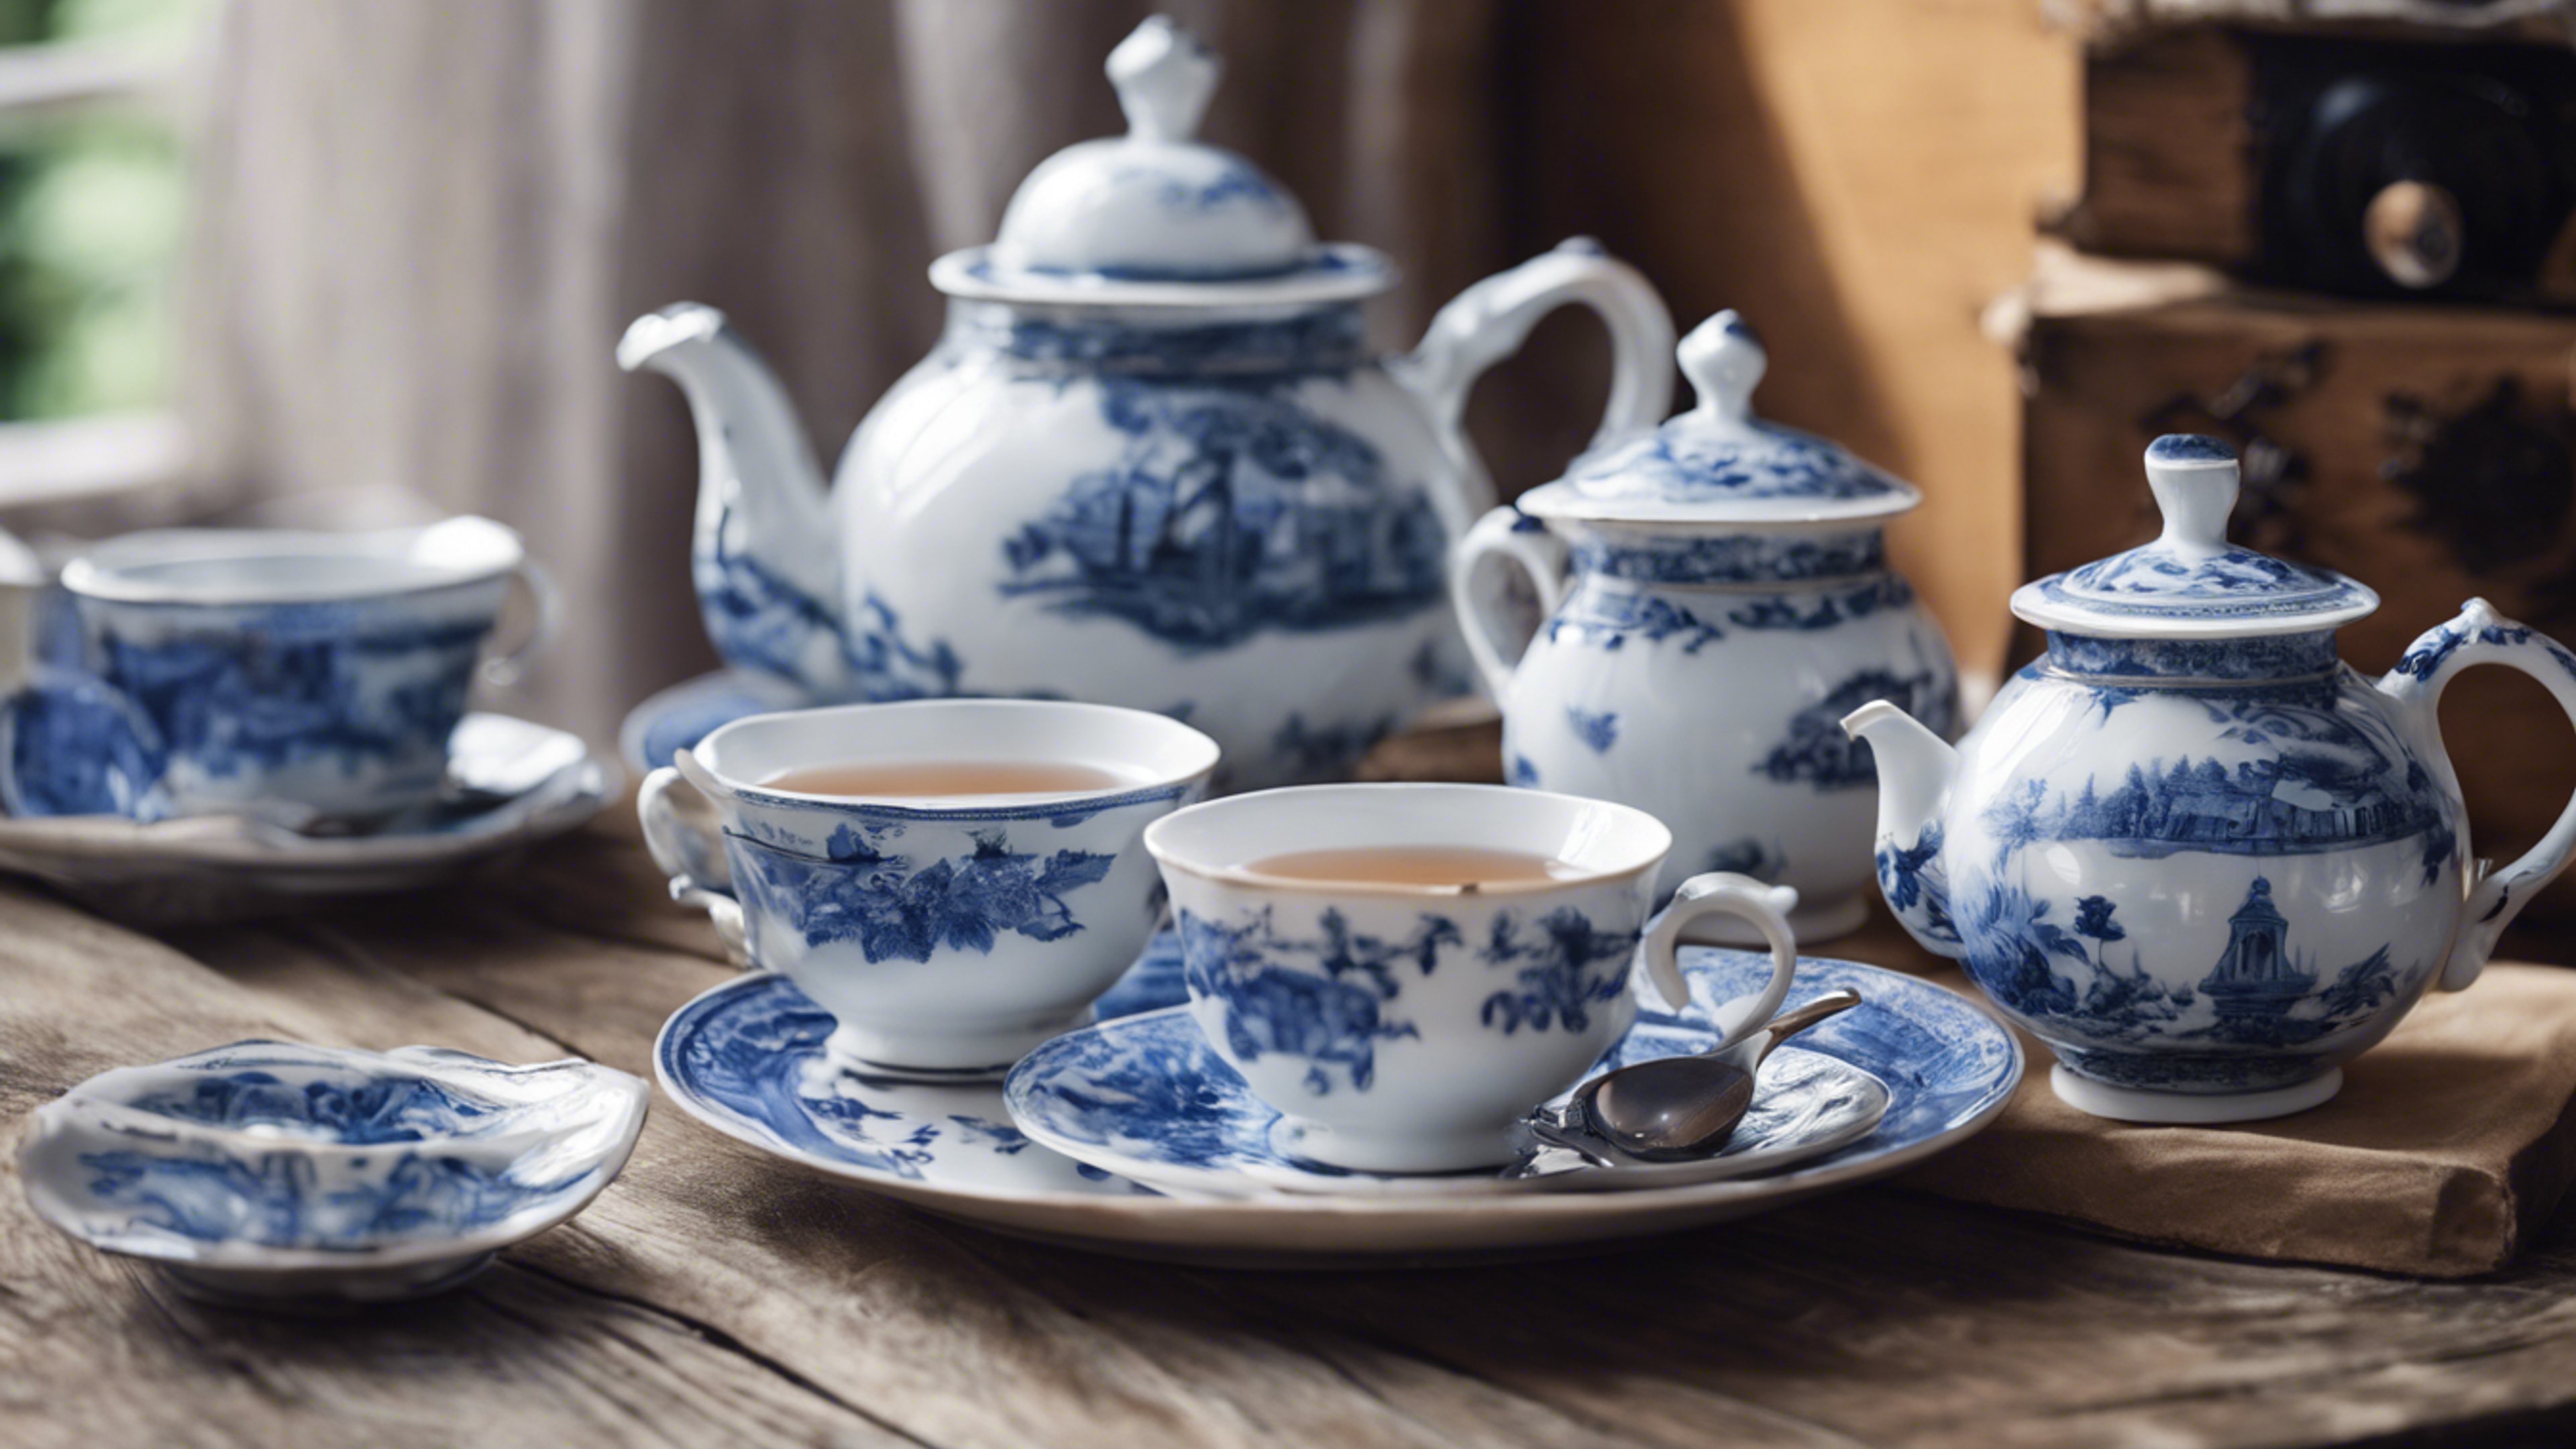 Vintage porcelain tea set in blue and white, placed on a rustic wooden table. Tapet[4fbd951e4e494dd09da7]